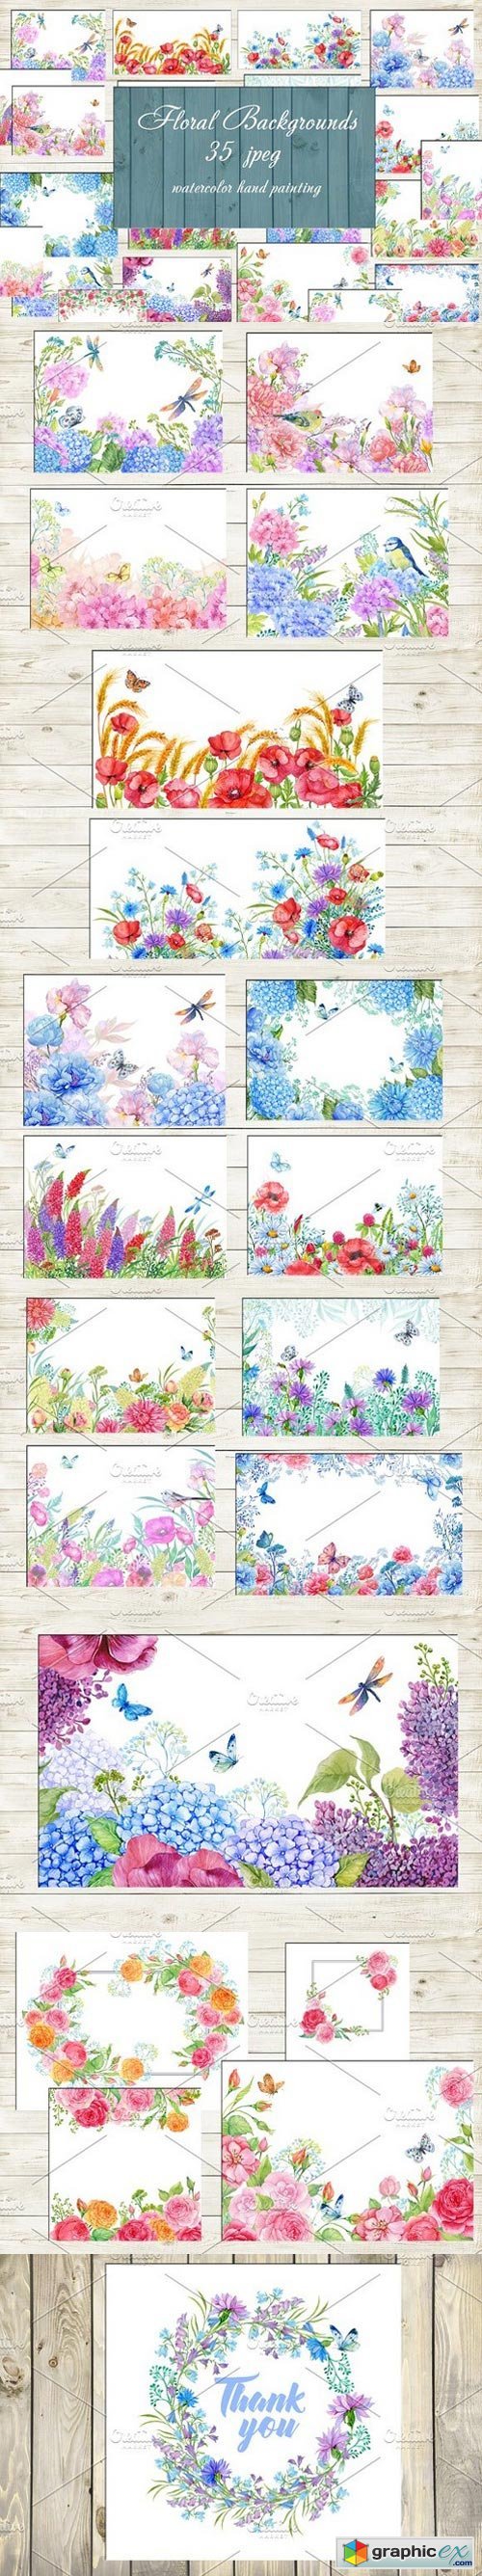 Floral backgrounds watercolor